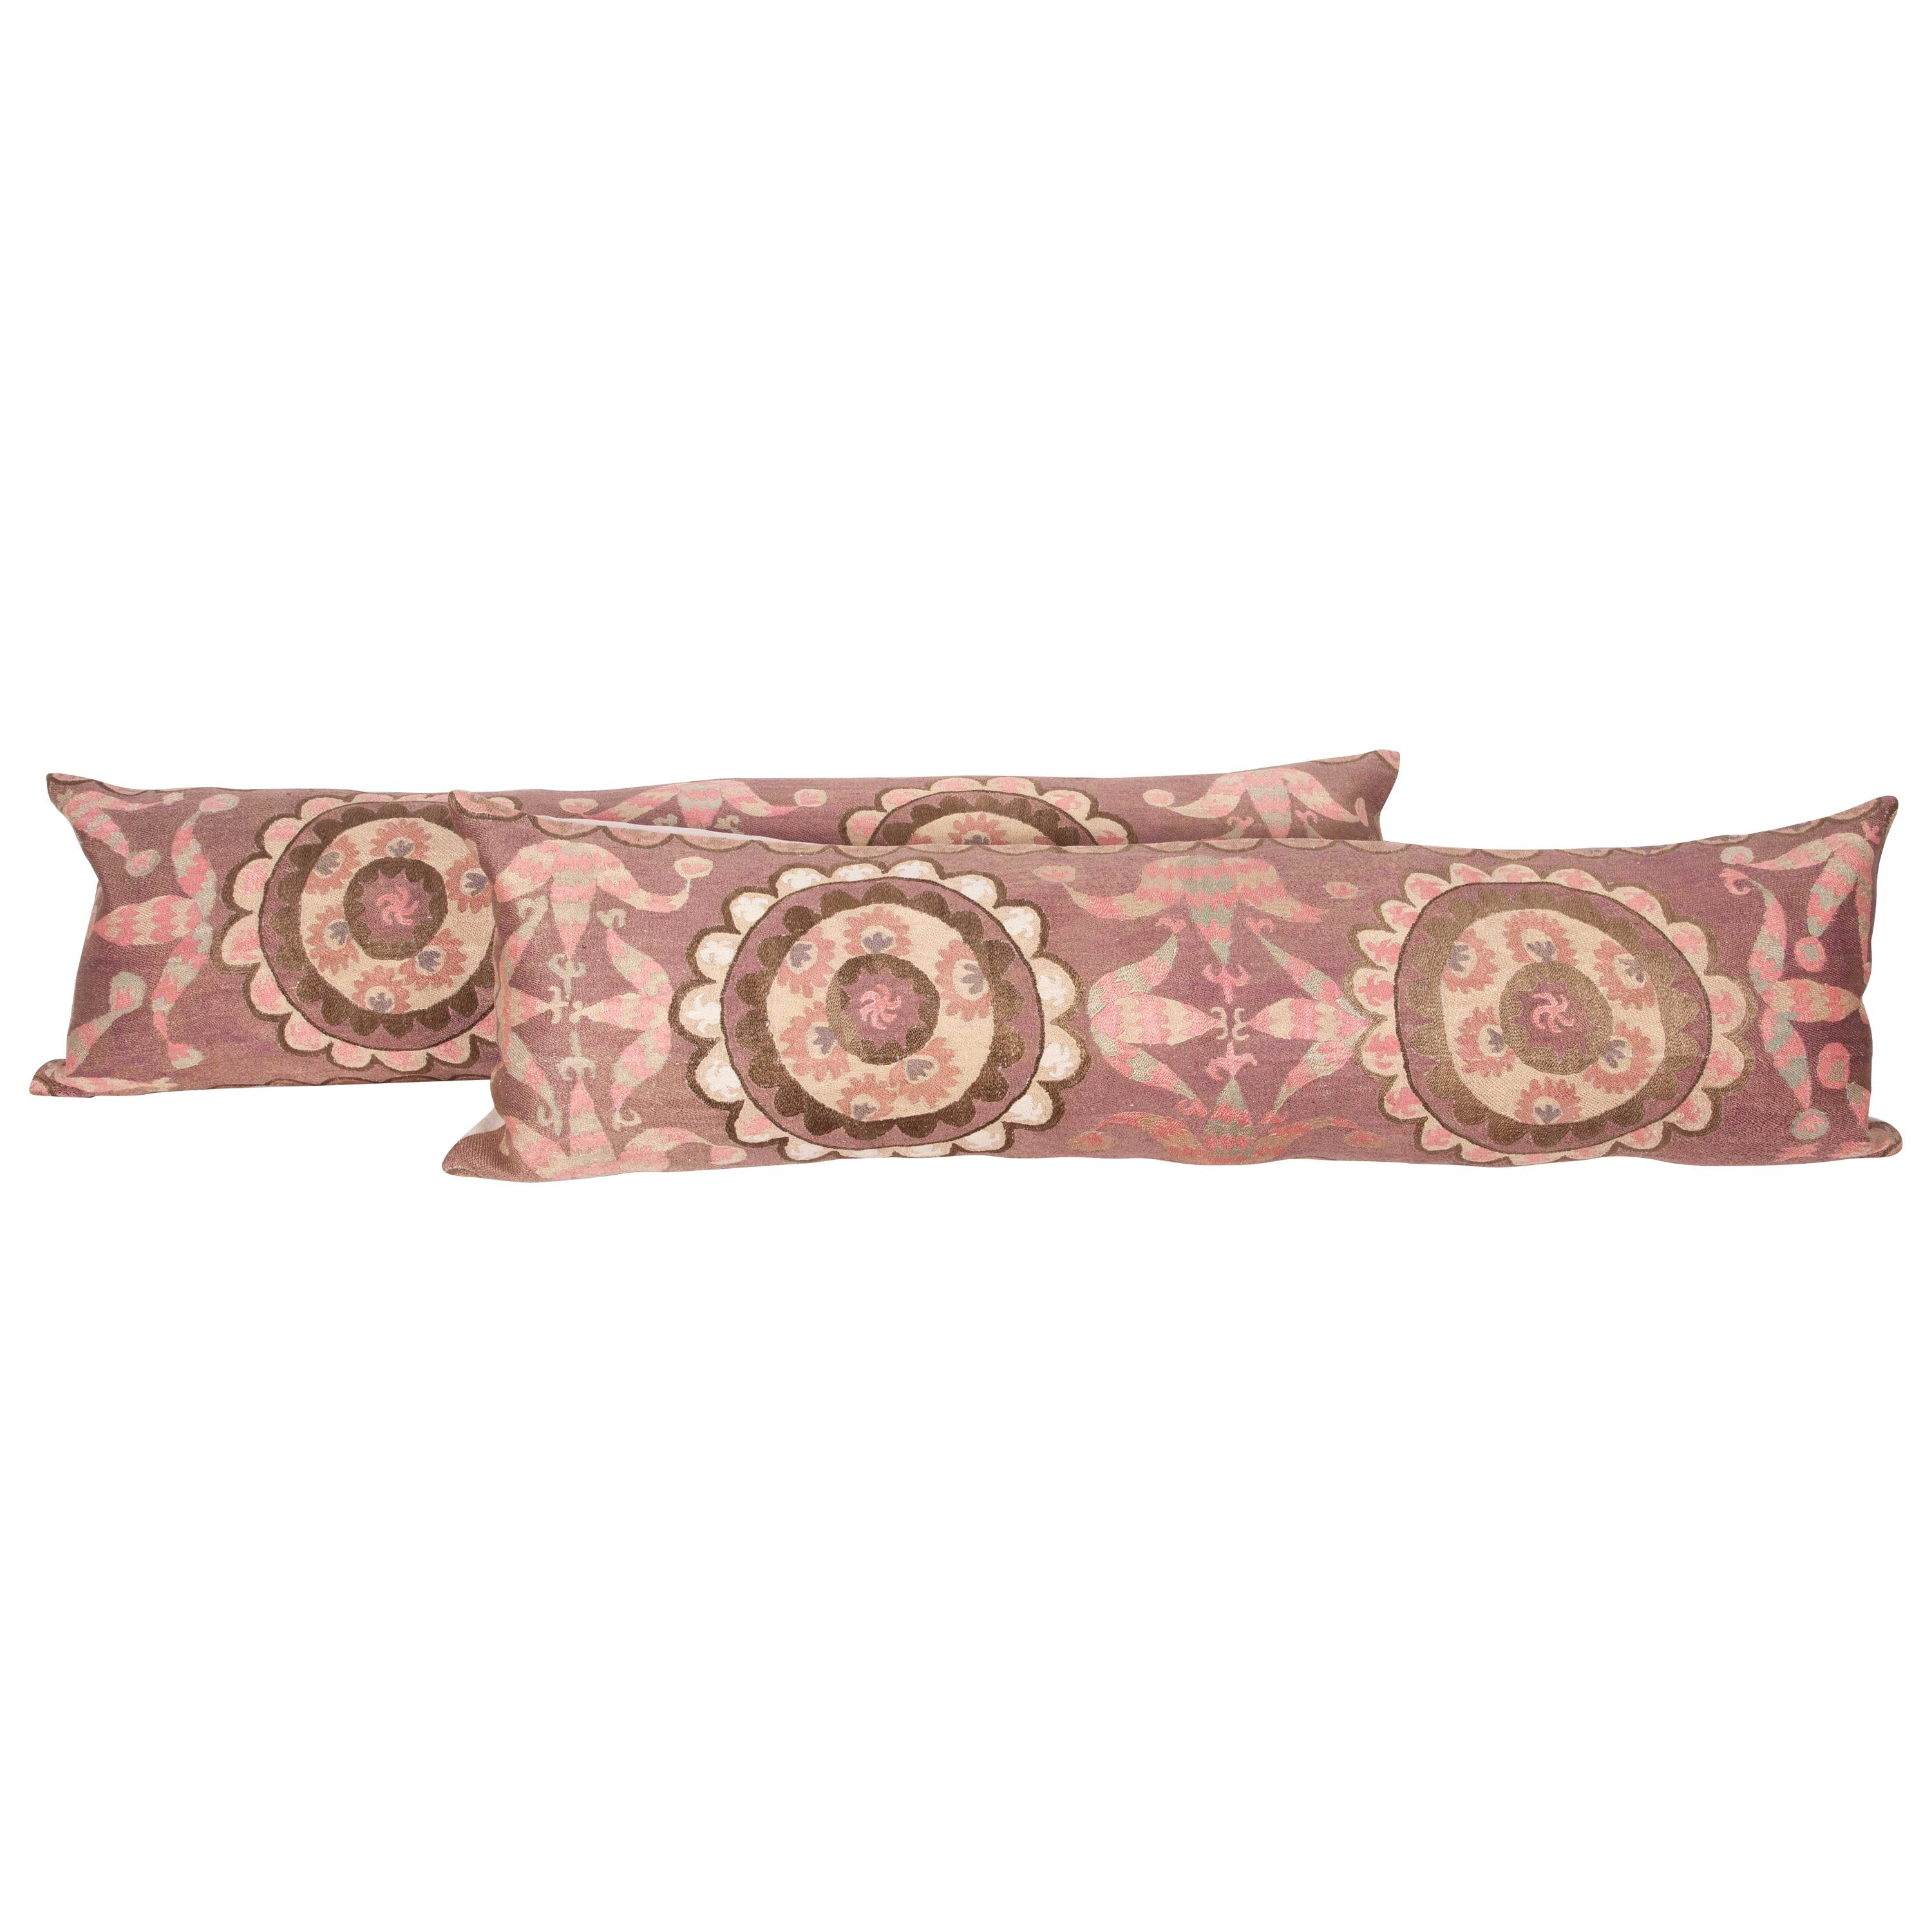 Suzani Lumbar Pillow Cases Fashioned from All-Over Embroidered Tashket Suzani